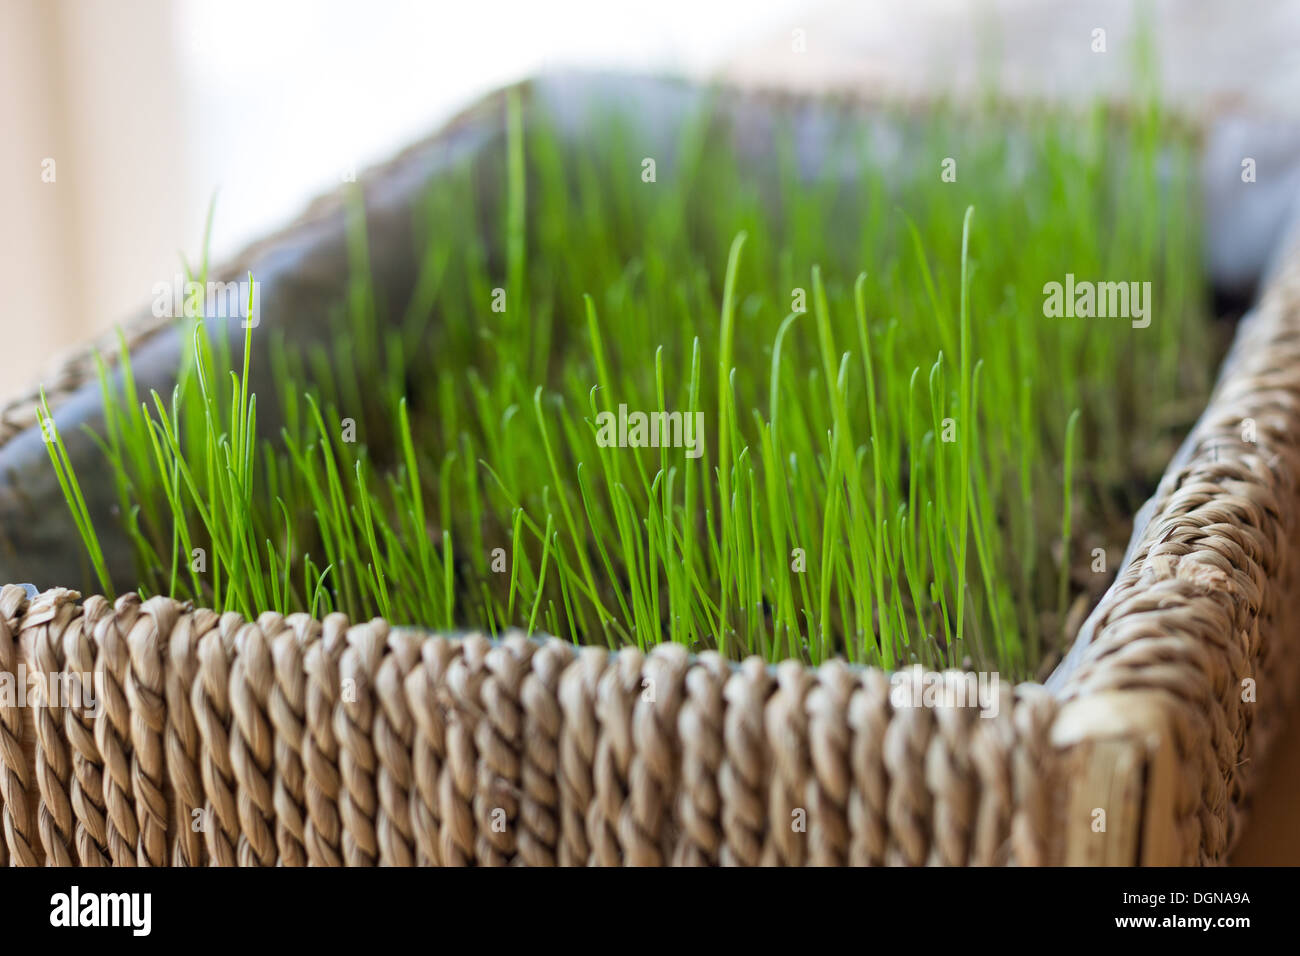 Closeup of traditional Nordic Easter grass in a basket Stock Photo